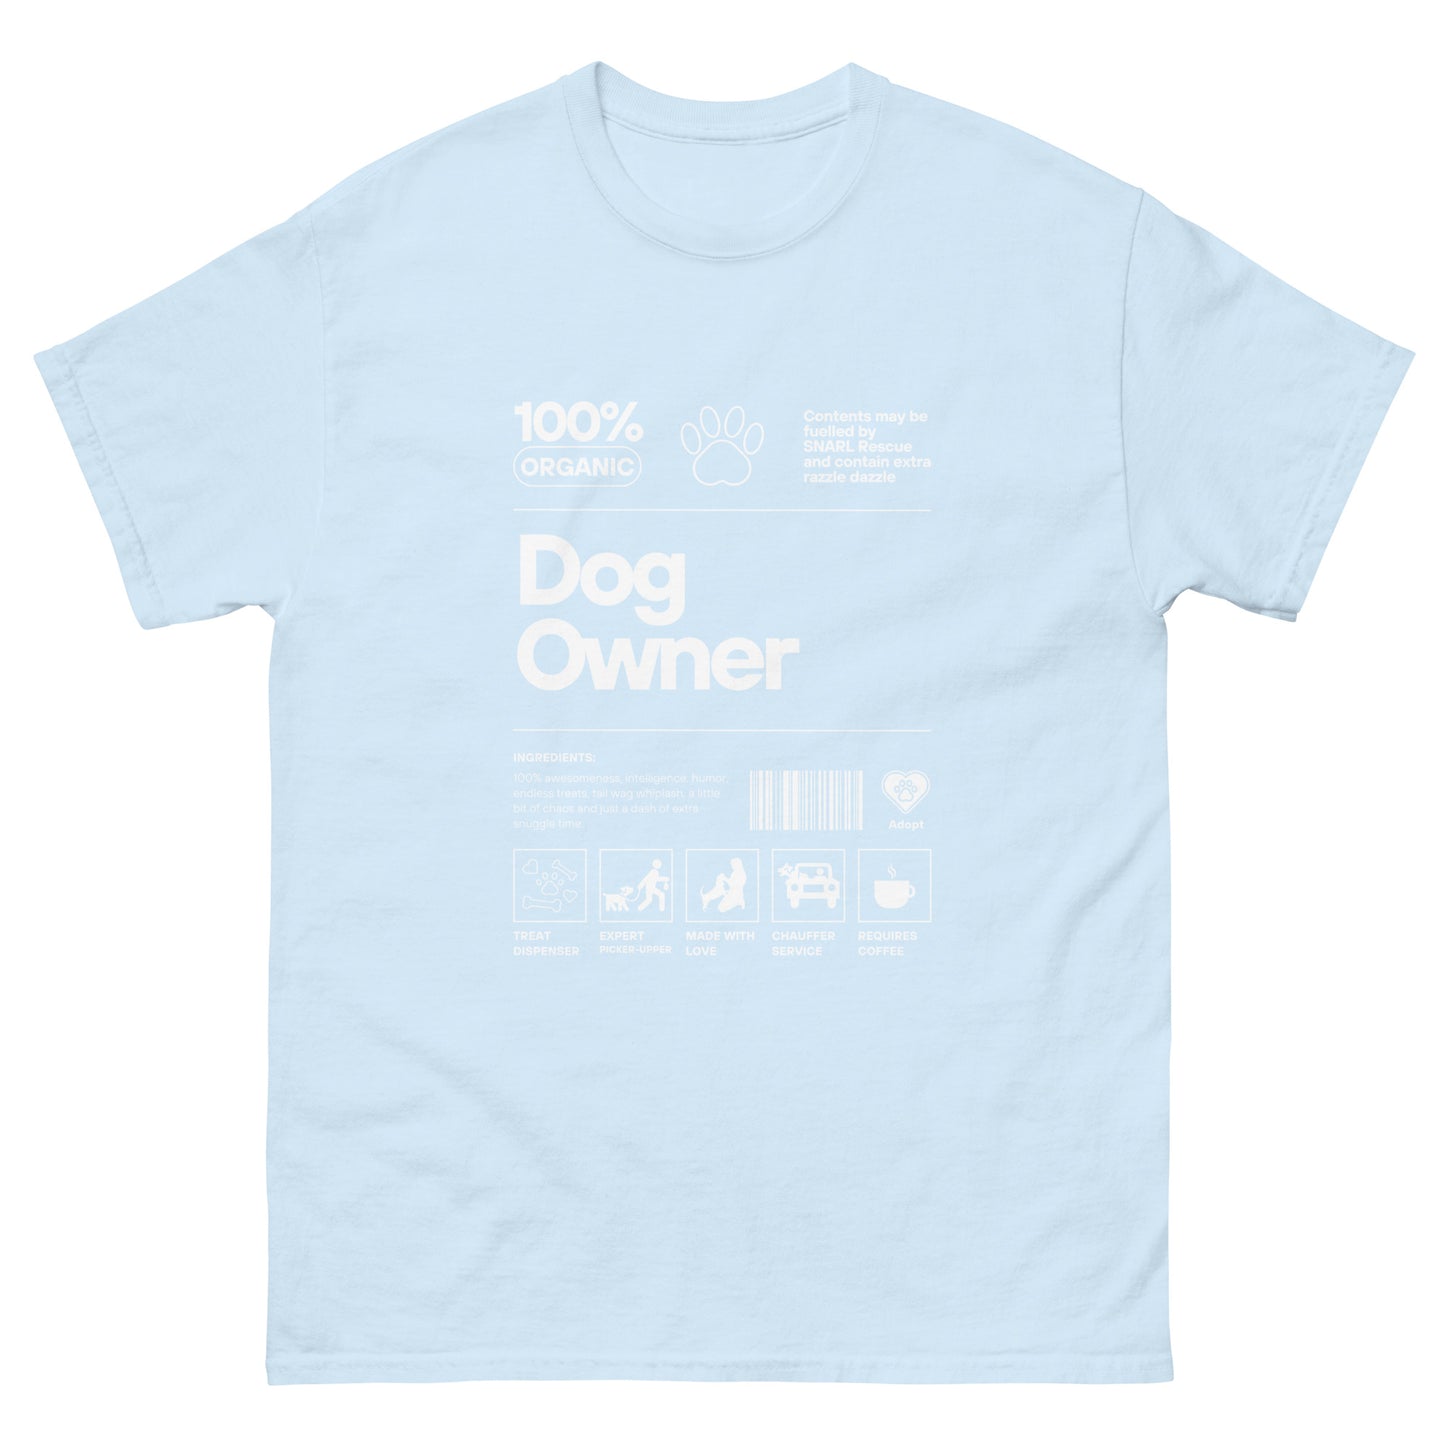 The "Dog Owner" Tee